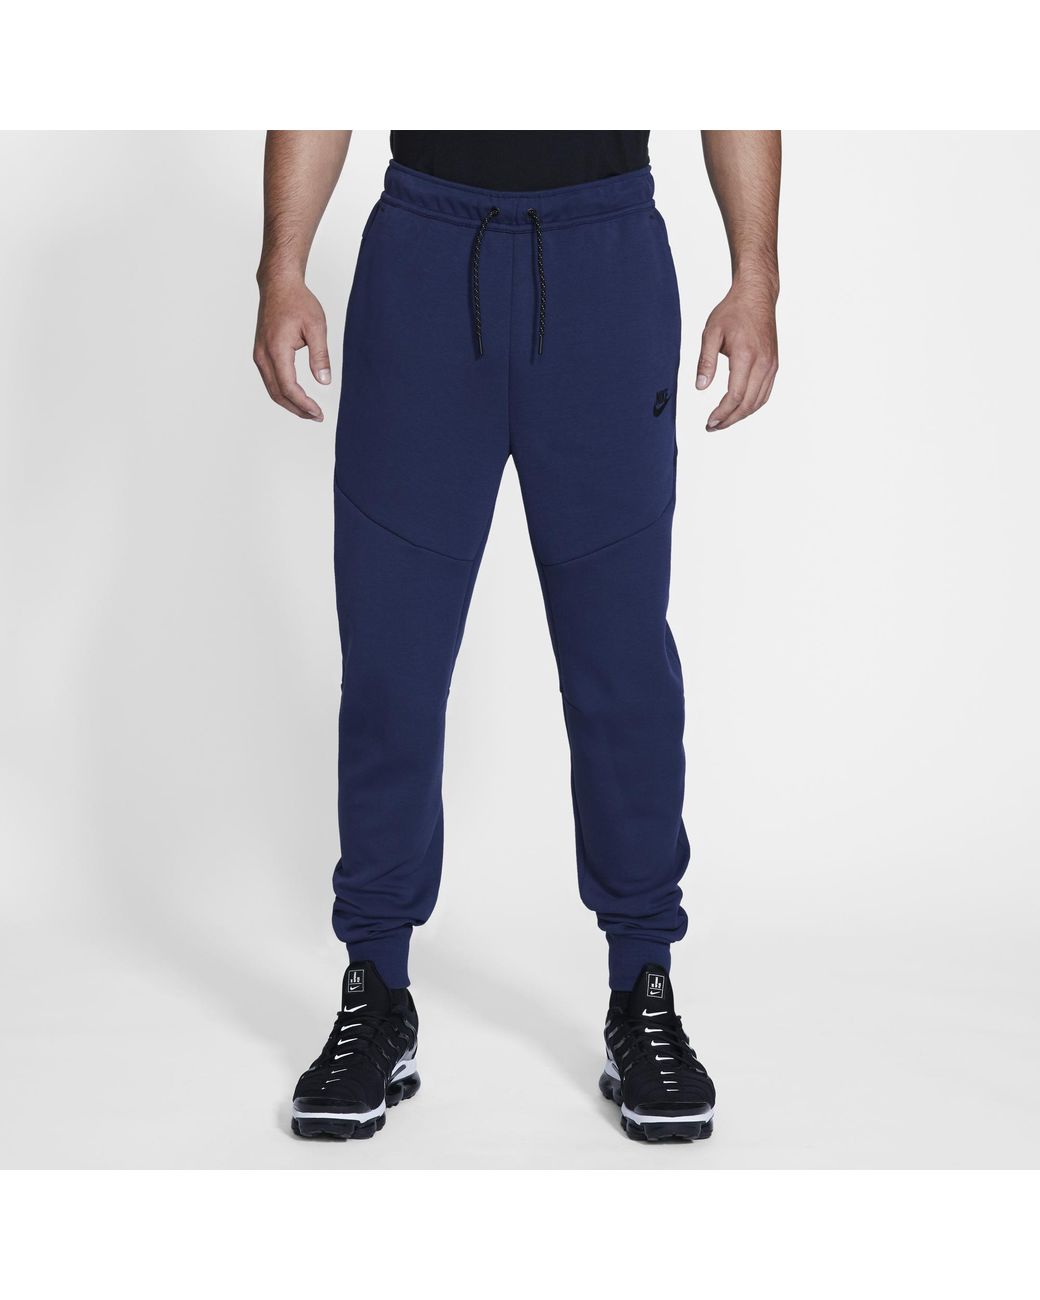 Novelist Climatic mountains Andrew Halliday Nike Tech Fleece Joggers in Midnight Navy/Black (Blue) for Men - Save 14% -  Lyst